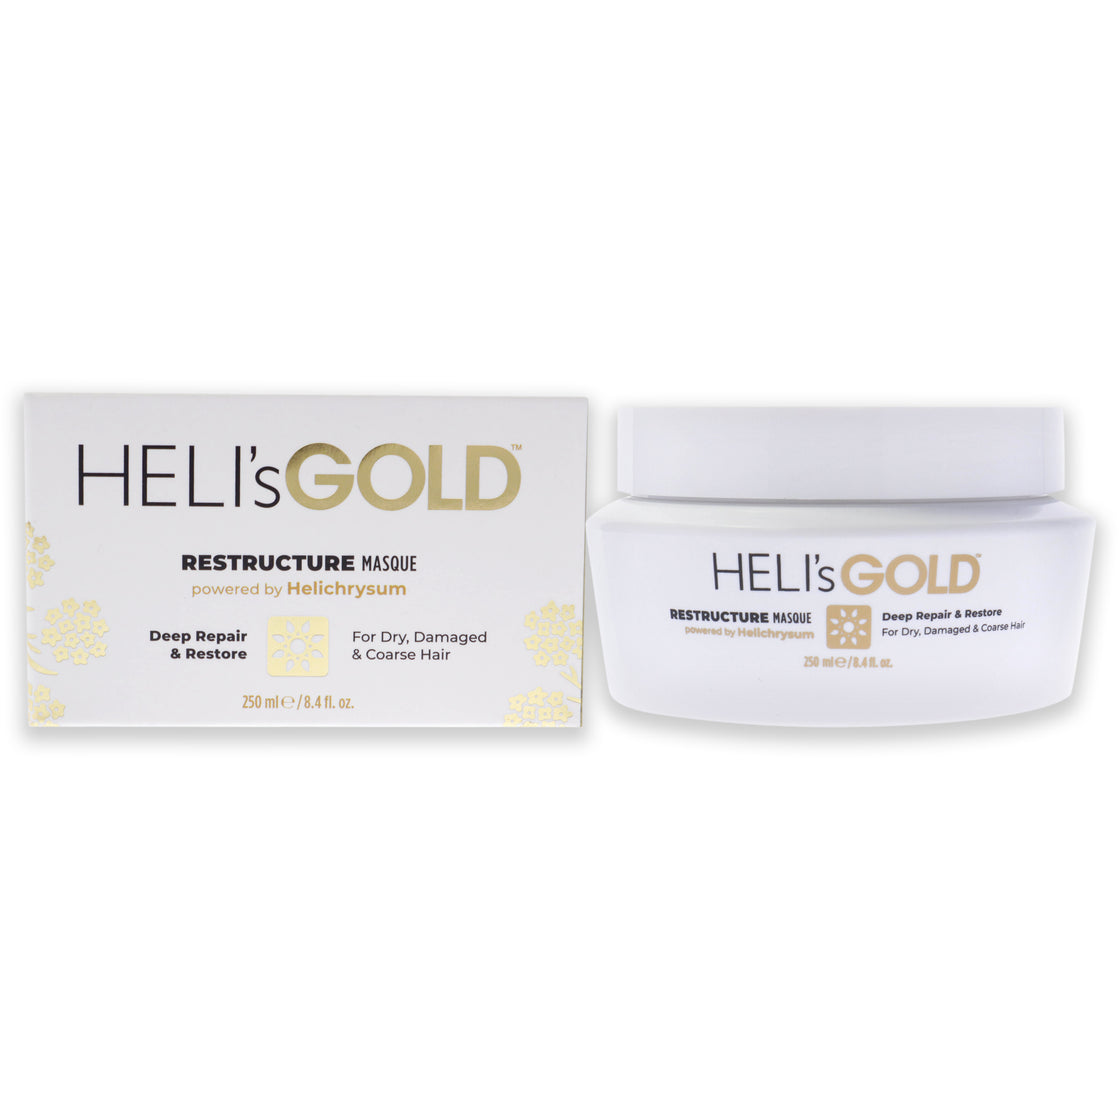 Restructure Masque by Helis Gold for Unisex - 8.4 oz Masque